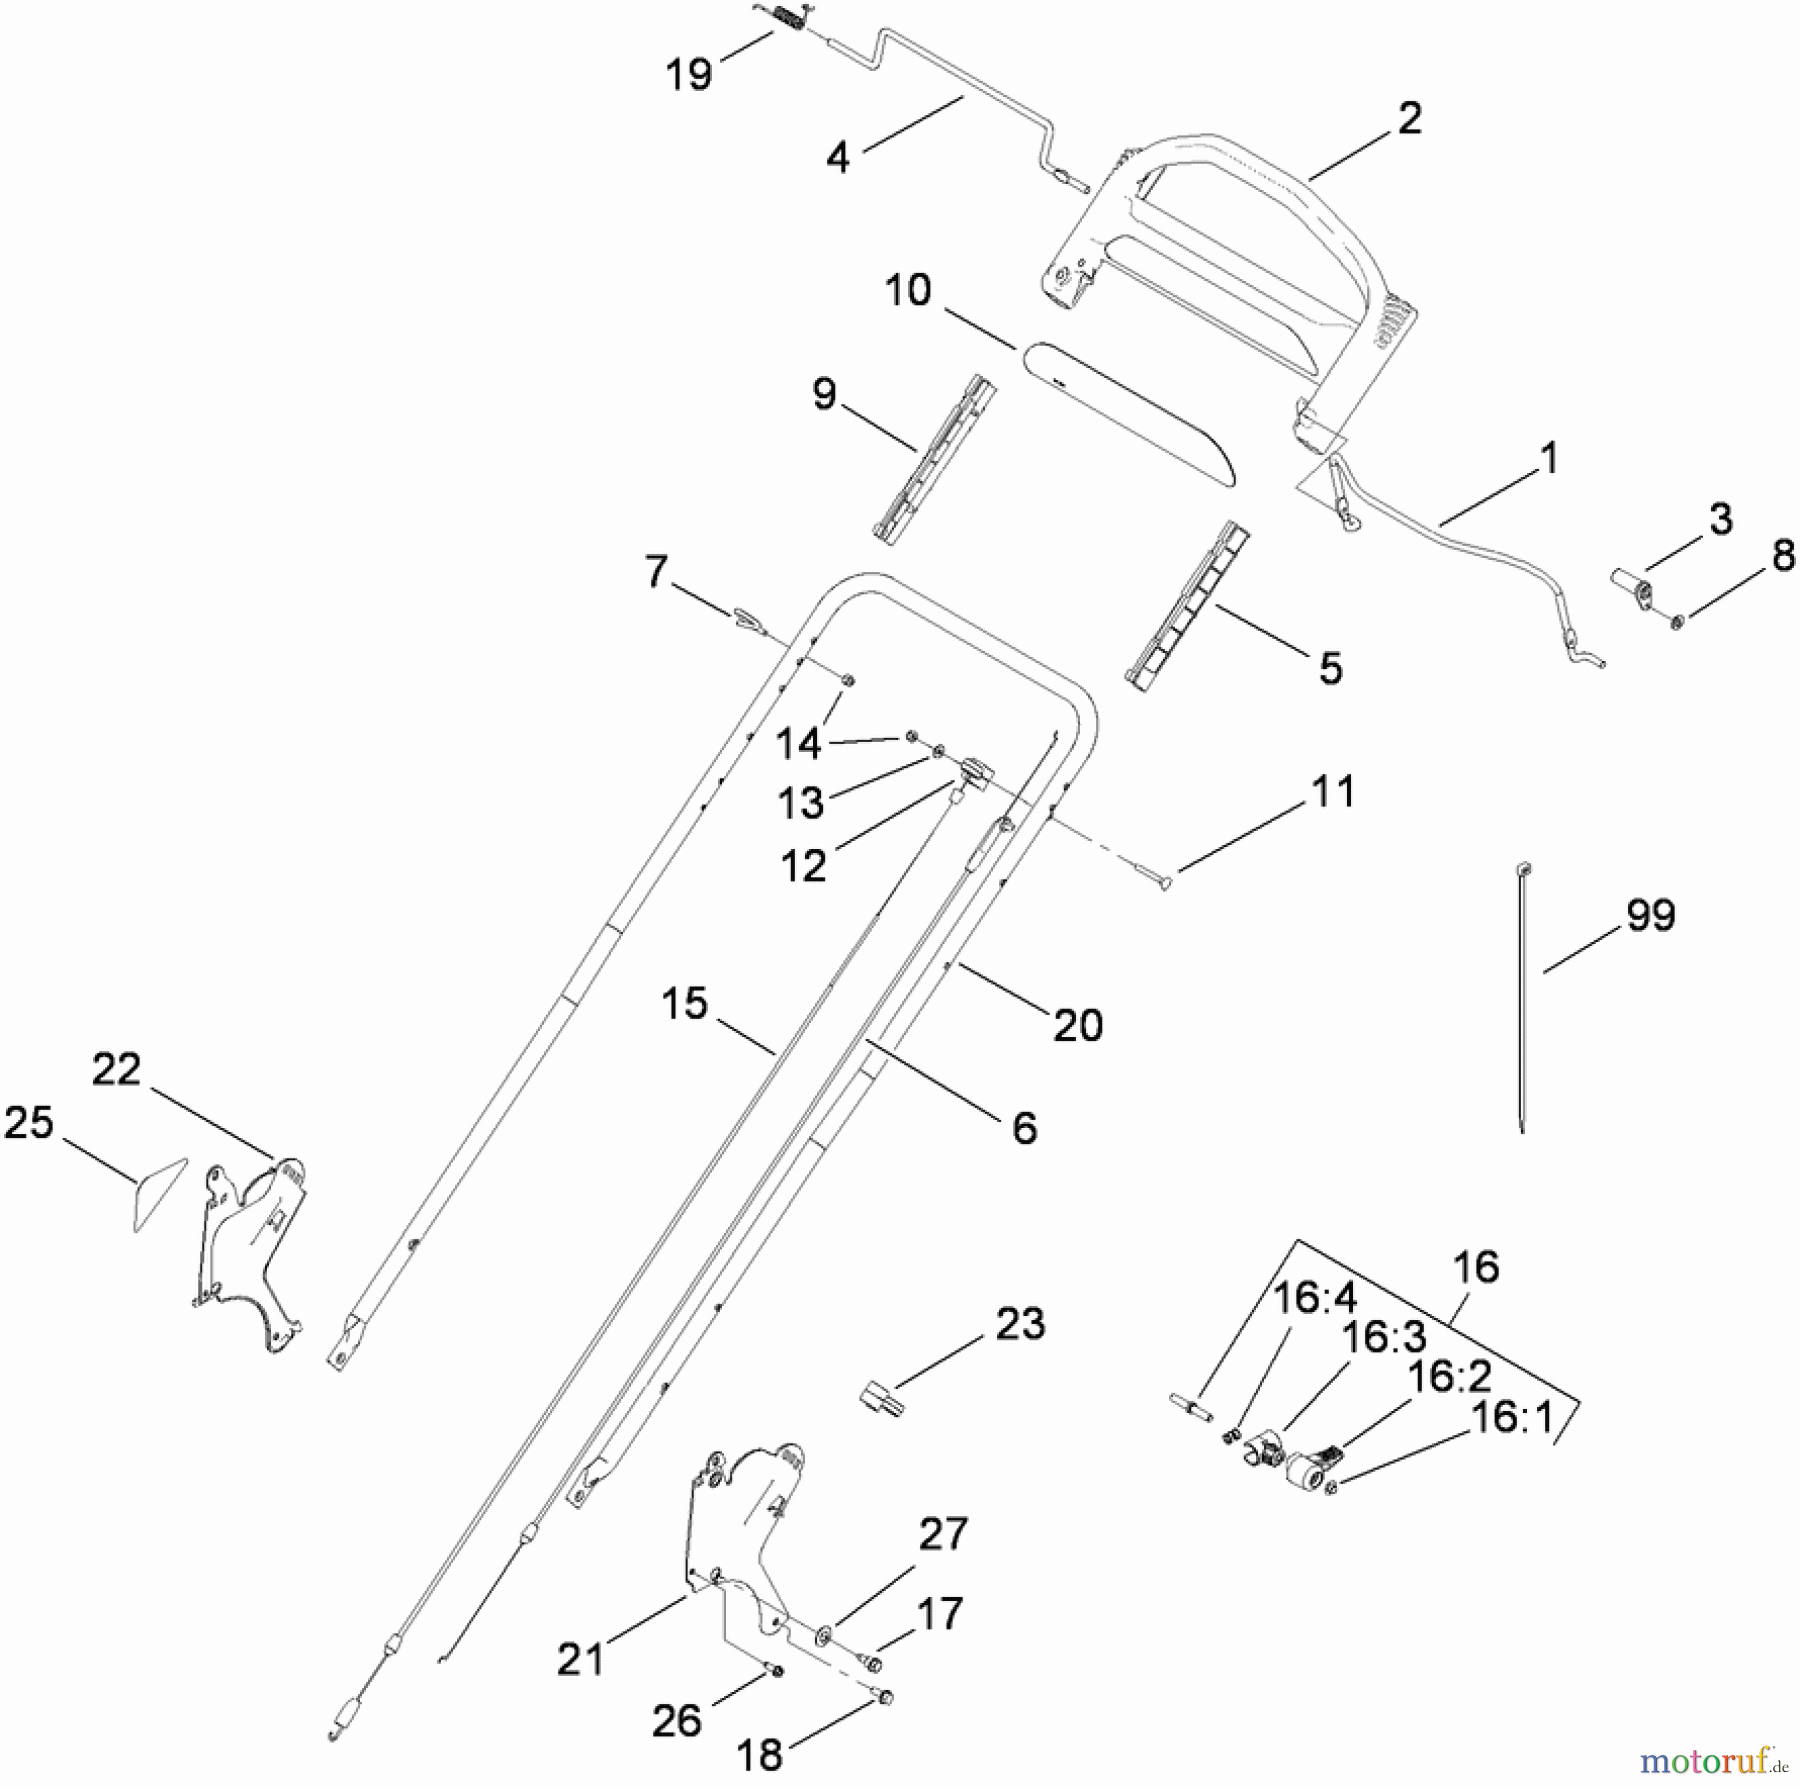  Toro Neu Mowers, Walk-Behind Seite 1 20099 - Toro Super Recycler Lawn Mower, 2010 (310000310-310999999) HANDLE AND CONTROL ASSEMBLY